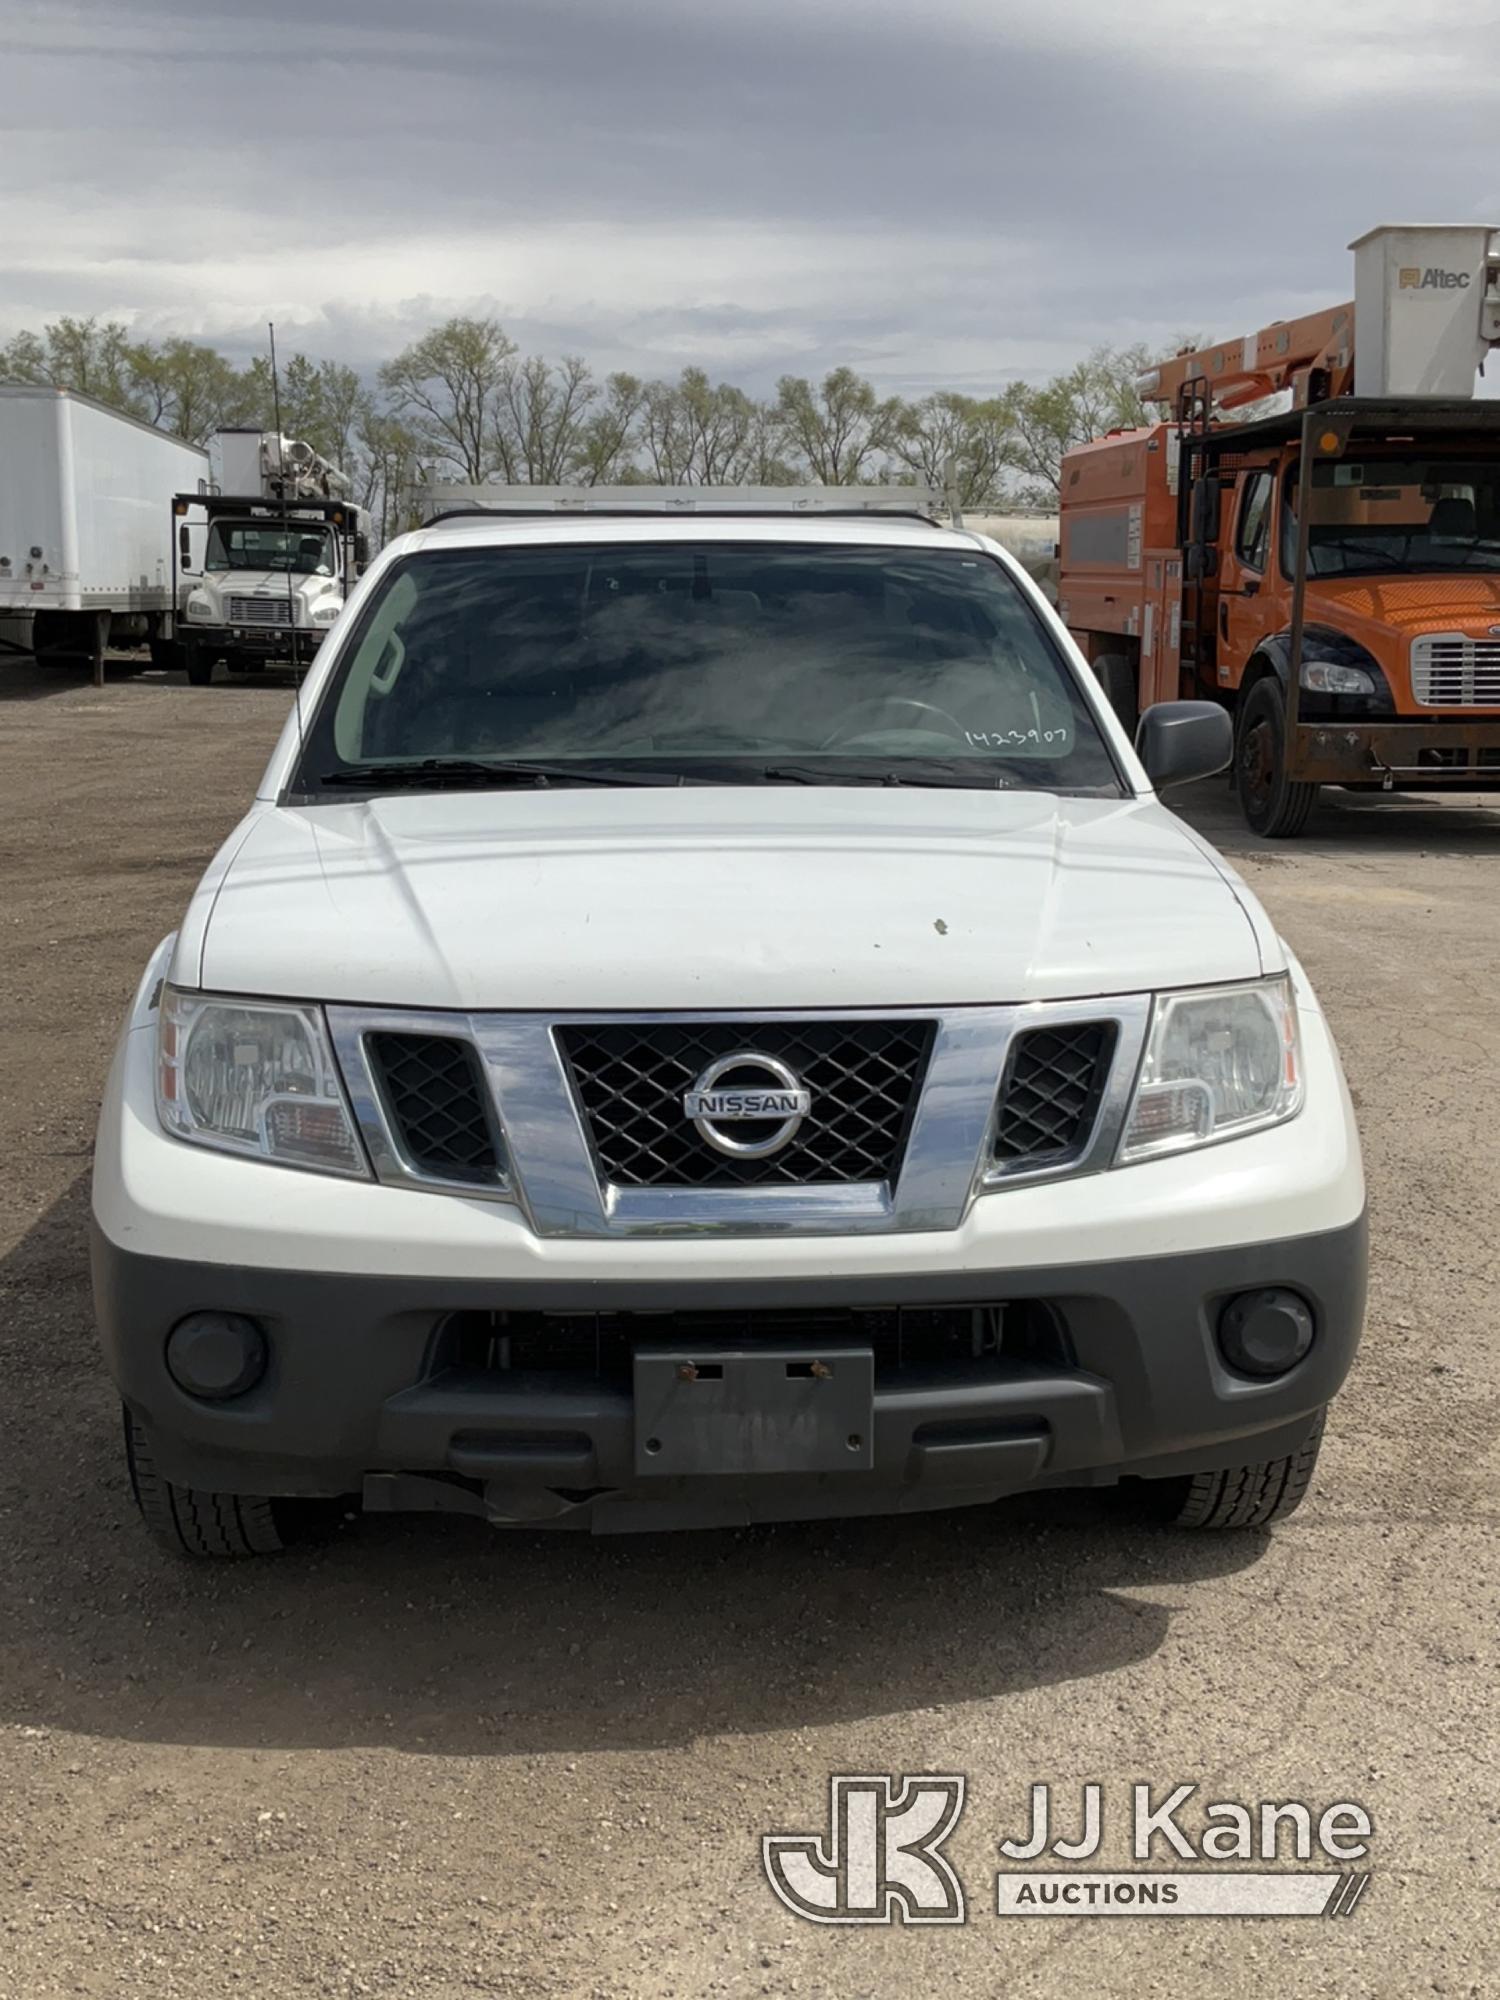 (South Beloit, IL) 2016 Nissan Frontier Extended-Cab Pickup Truck Runs & Moves) (Body/Paint Damage,